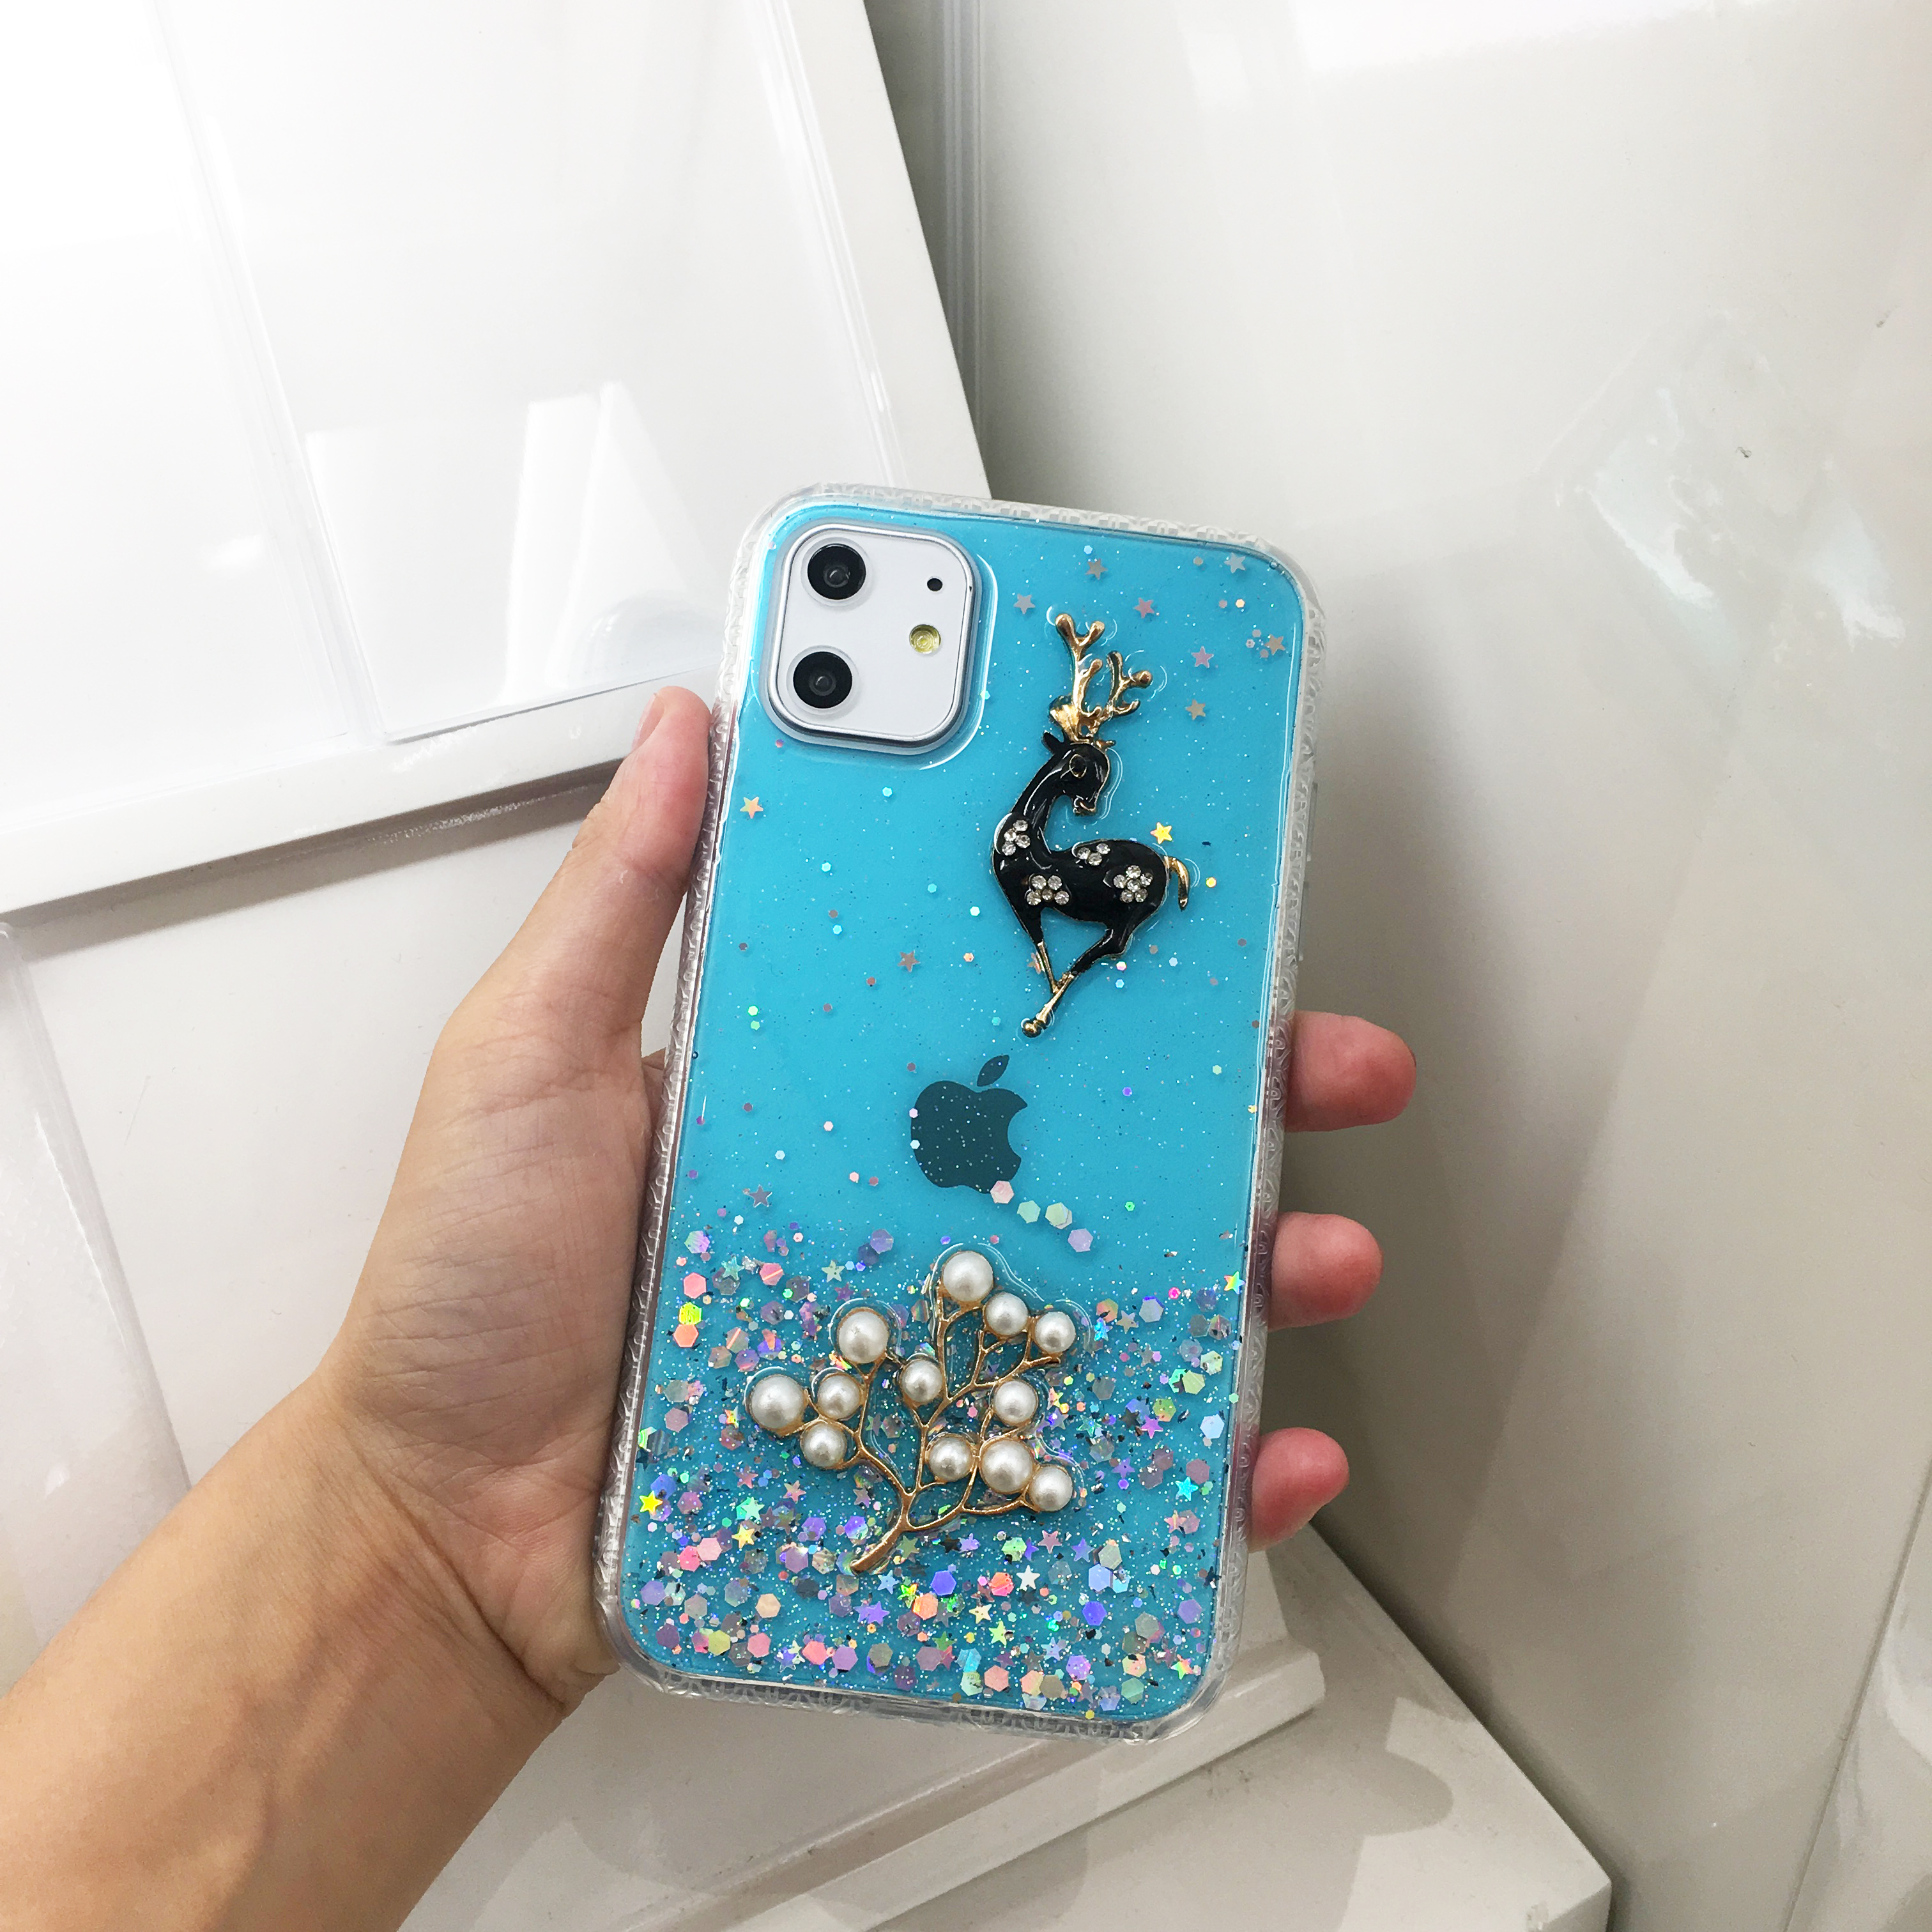 iPHONE 11 Pro (5.8in) 3D Deer Crystal Diamond Shiny Case (Blue)